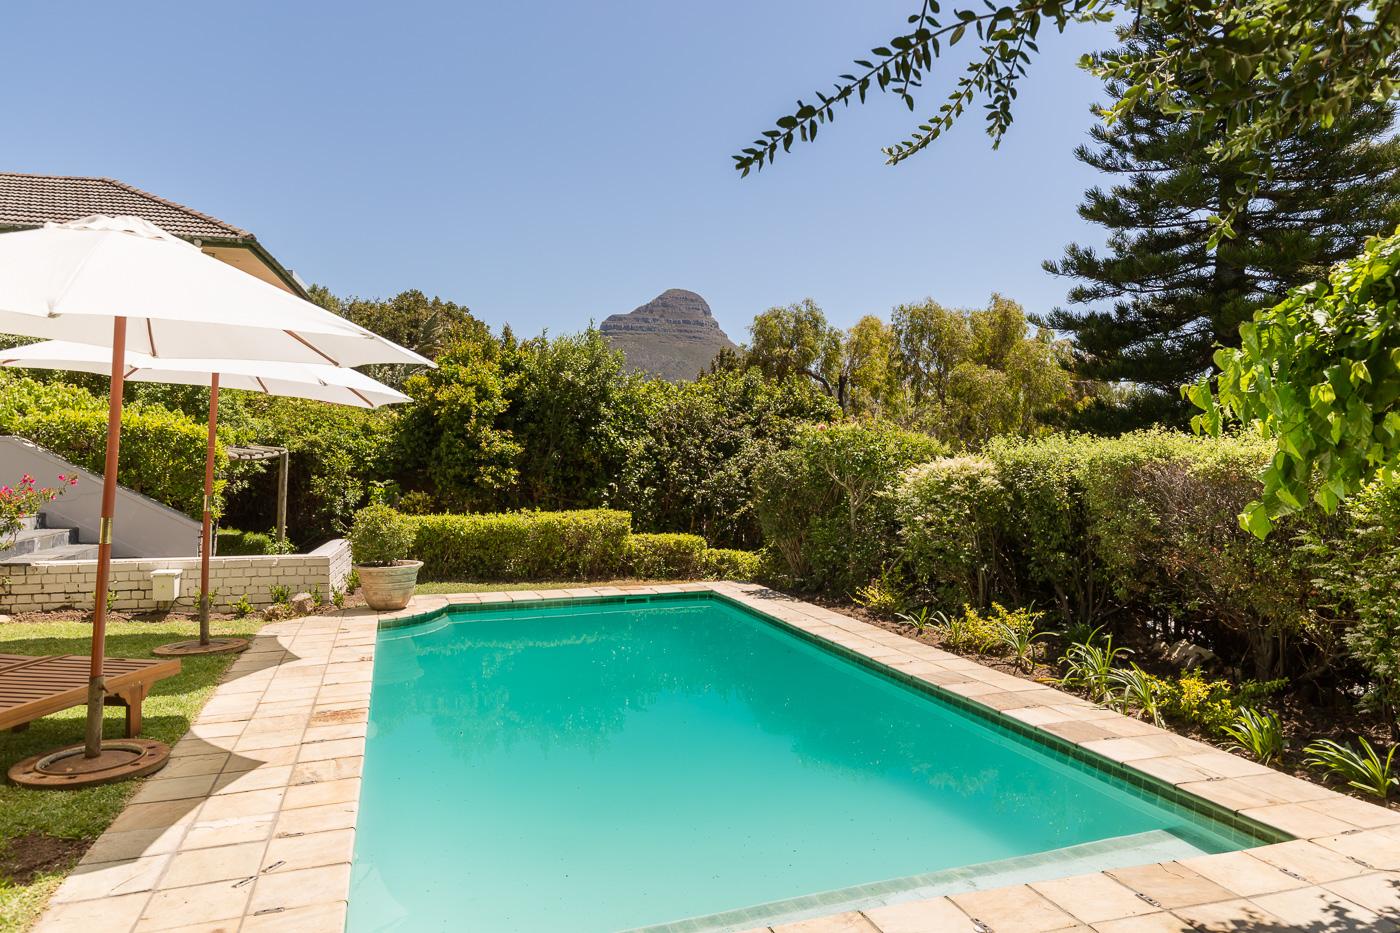 Photo 17 of Bella Montagna accommodation in Oranjezicht, Cape Town with 4 bedrooms and 2 bathrooms